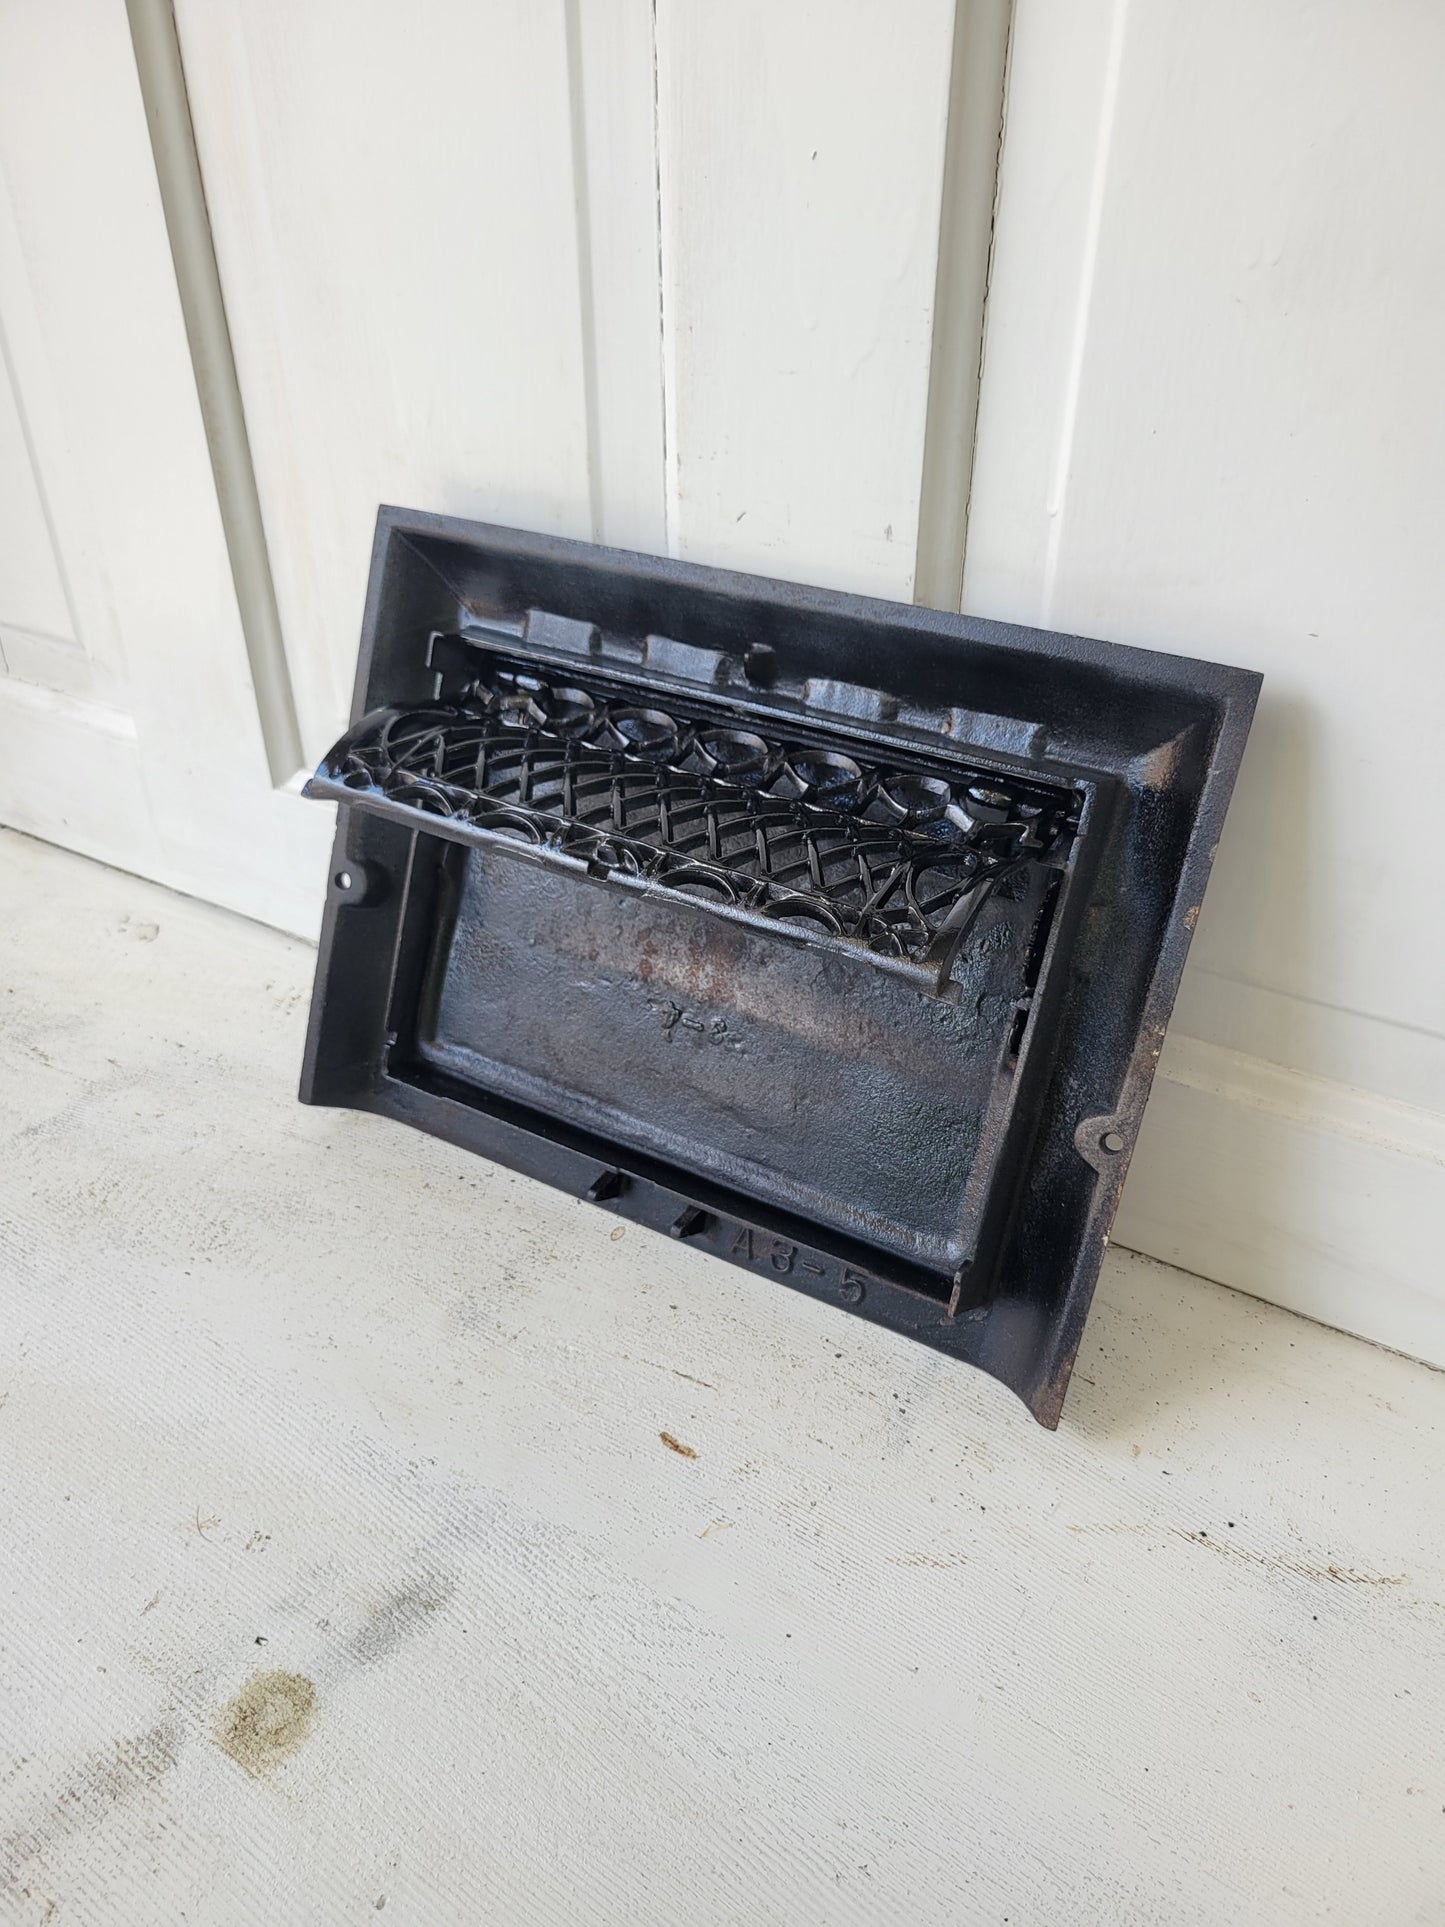 10 x 14 Fancy Cast Iron Fold Out Vent Cover, Antique Floor Register Cover with Dampers #072908